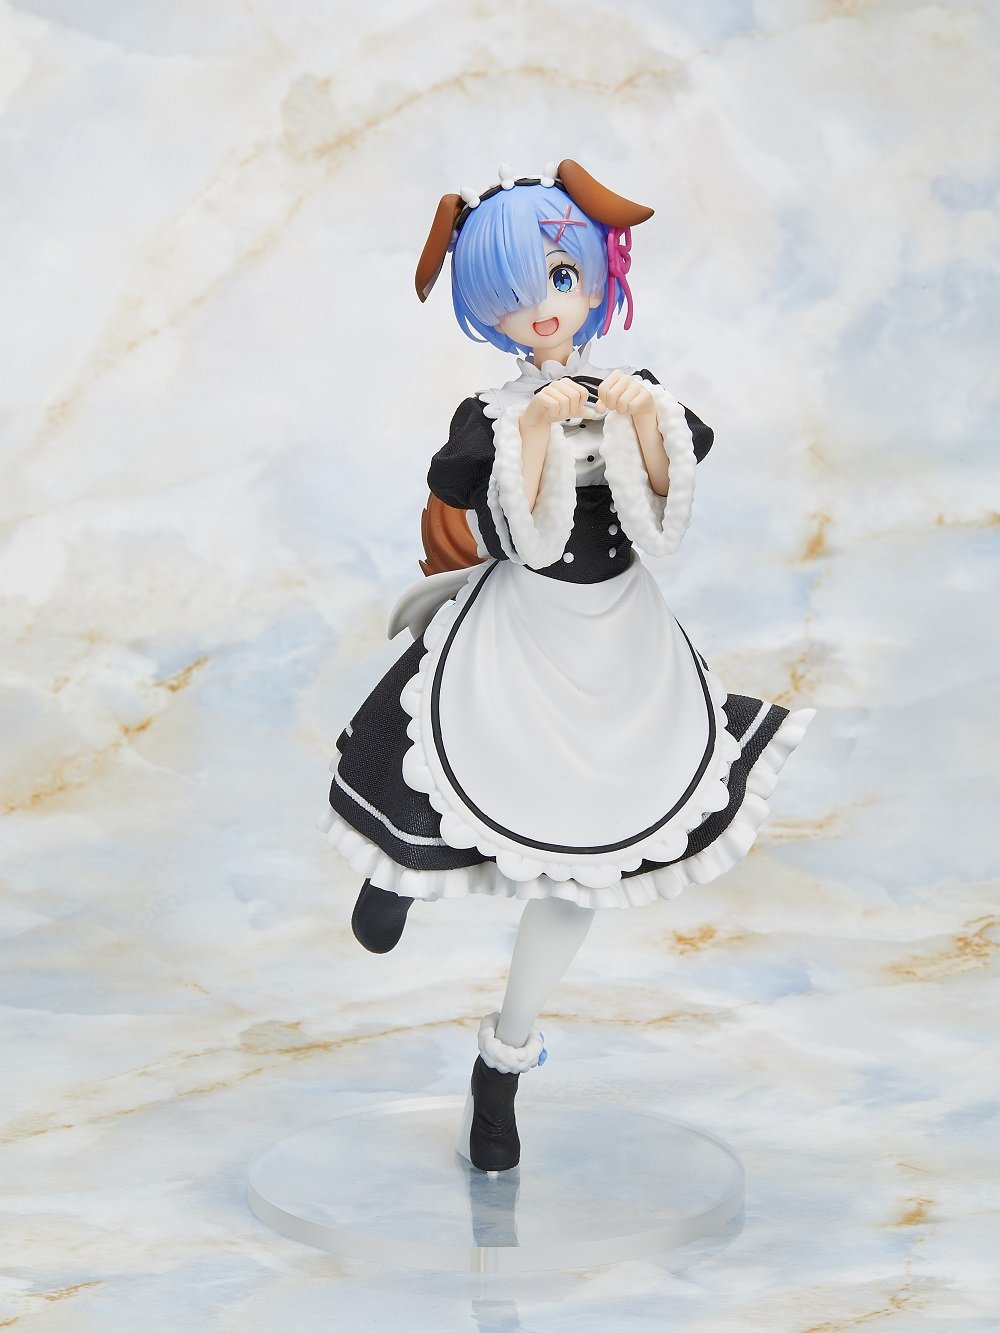 Rem Embraces Her Child Self in Adorable New Re:ZERO Figure - Crunchyroll  News